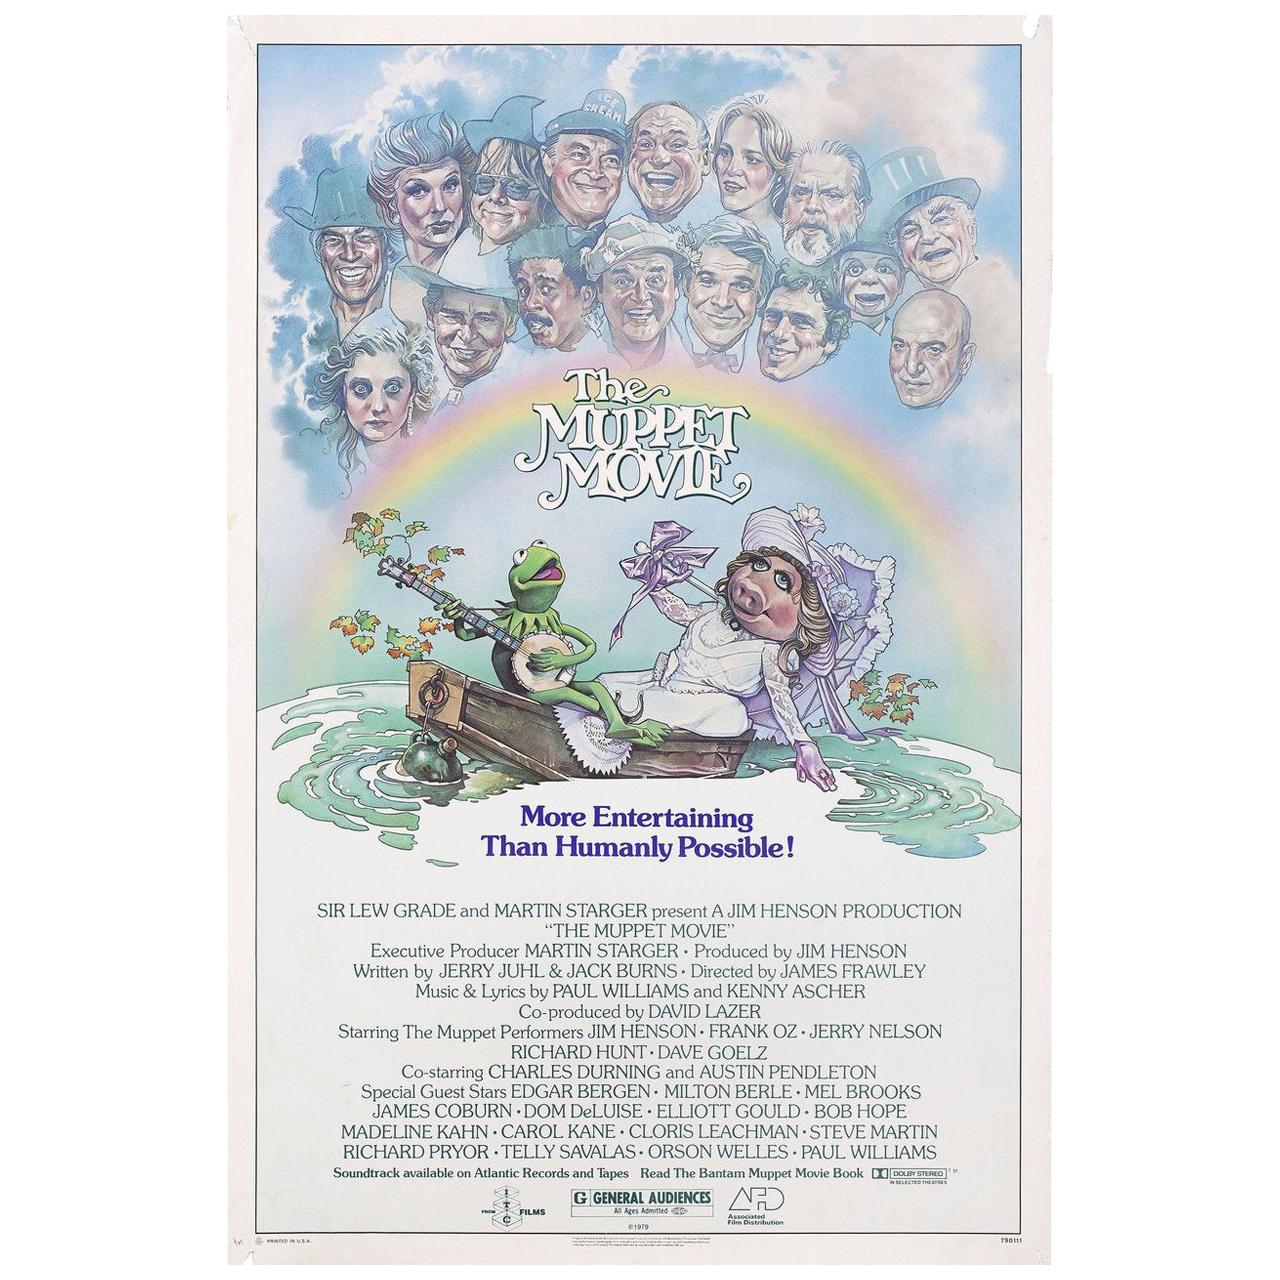 “The Muppet Movie” 1979 U.S. One Sheet Film Poster